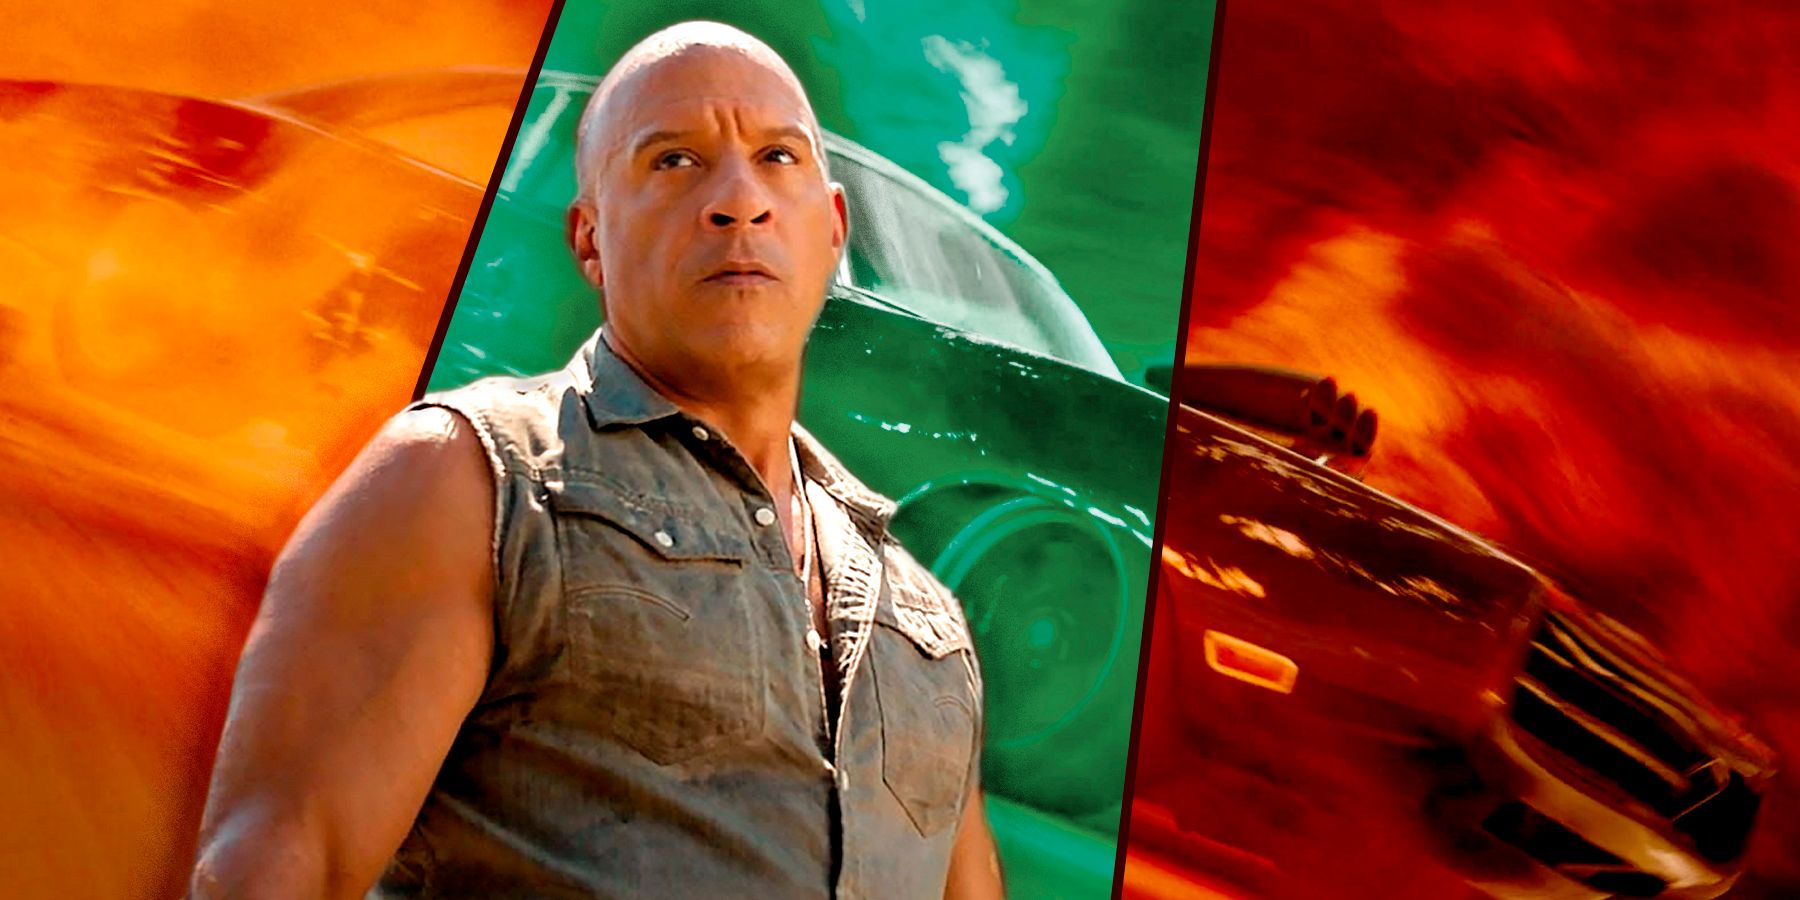 Vin Diesel as Dominic Toretto in front of a custom background